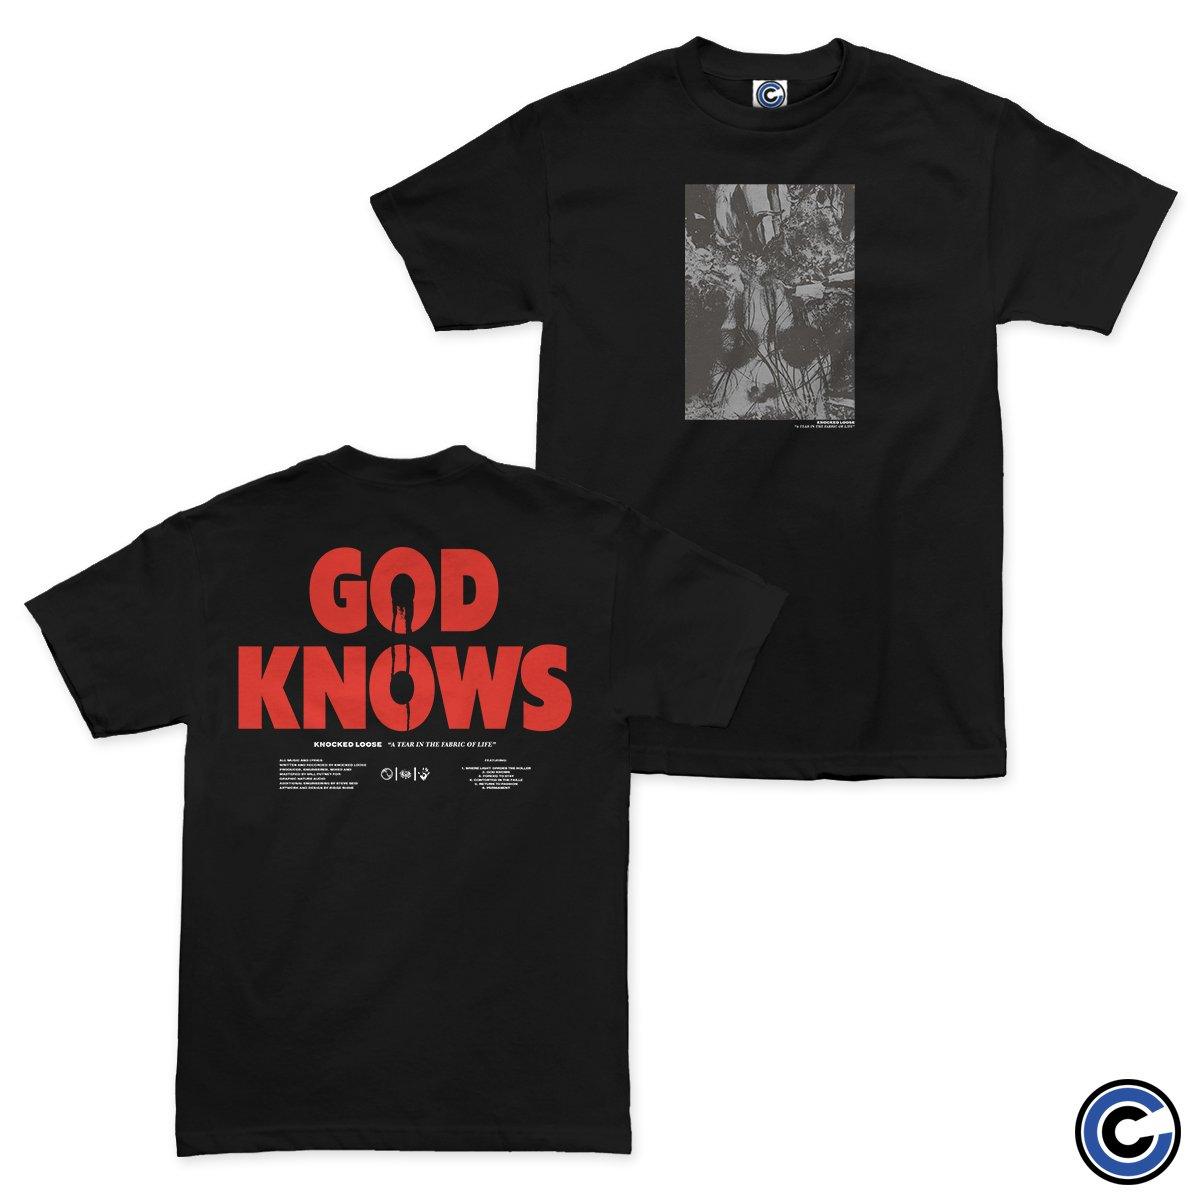 Buy – Knocked Loose "God Knows" Shirt – Band & Music Merch – Cold Cuts Merch